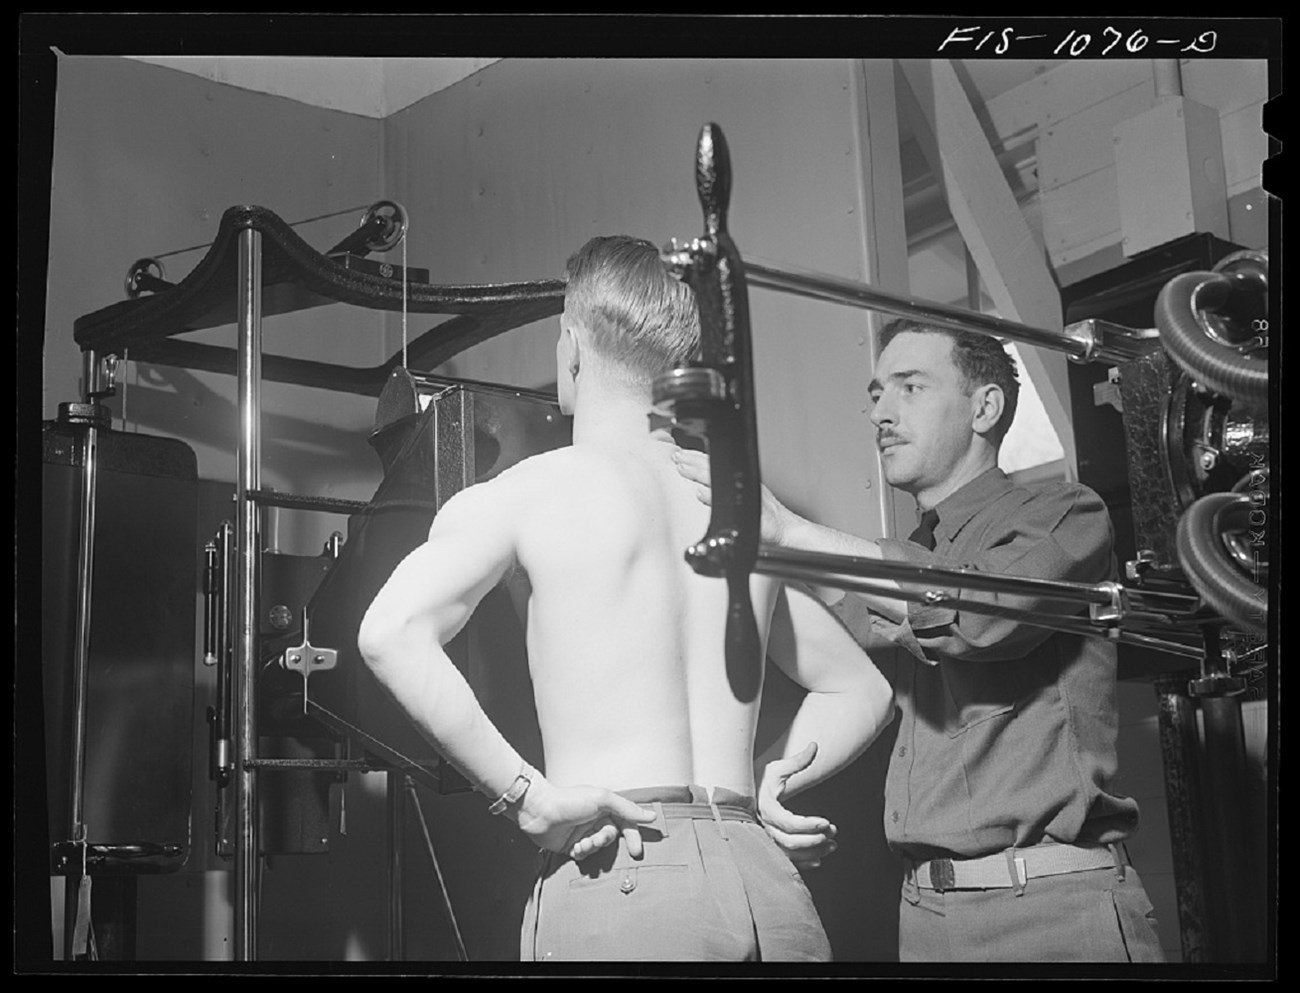 Black and white photo. Middle-aged white man with a mustache conducts a physical exam of a shirtless young man who faces away from the camera with his hands resting behind his hips. The examinee is blond and muscular. Metal measuring devices surround them